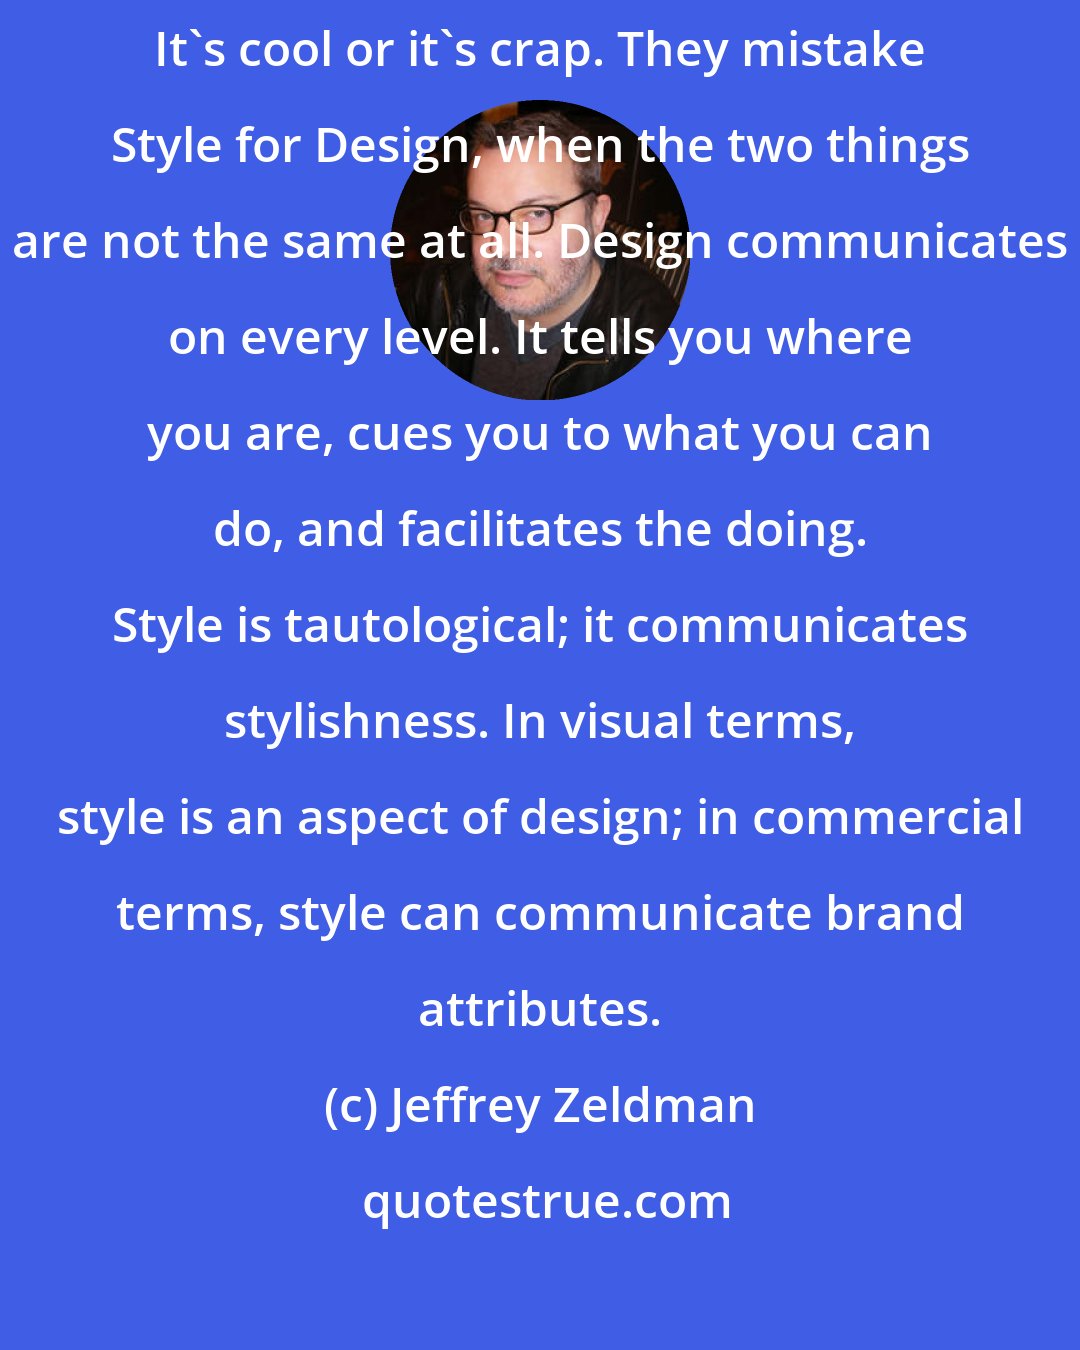 Jeffrey Zeldman: Many young web designers view their craft the way I used to view pop culture. It's cool or it's crap. They mistake Style for Design, when the two things are not the same at all. Design communicates on every level. It tells you where you are, cues you to what you can do, and facilitates the doing. Style is tautological; it communicates stylishness. In visual terms, style is an aspect of design; in commercial terms, style can communicate brand attributes.